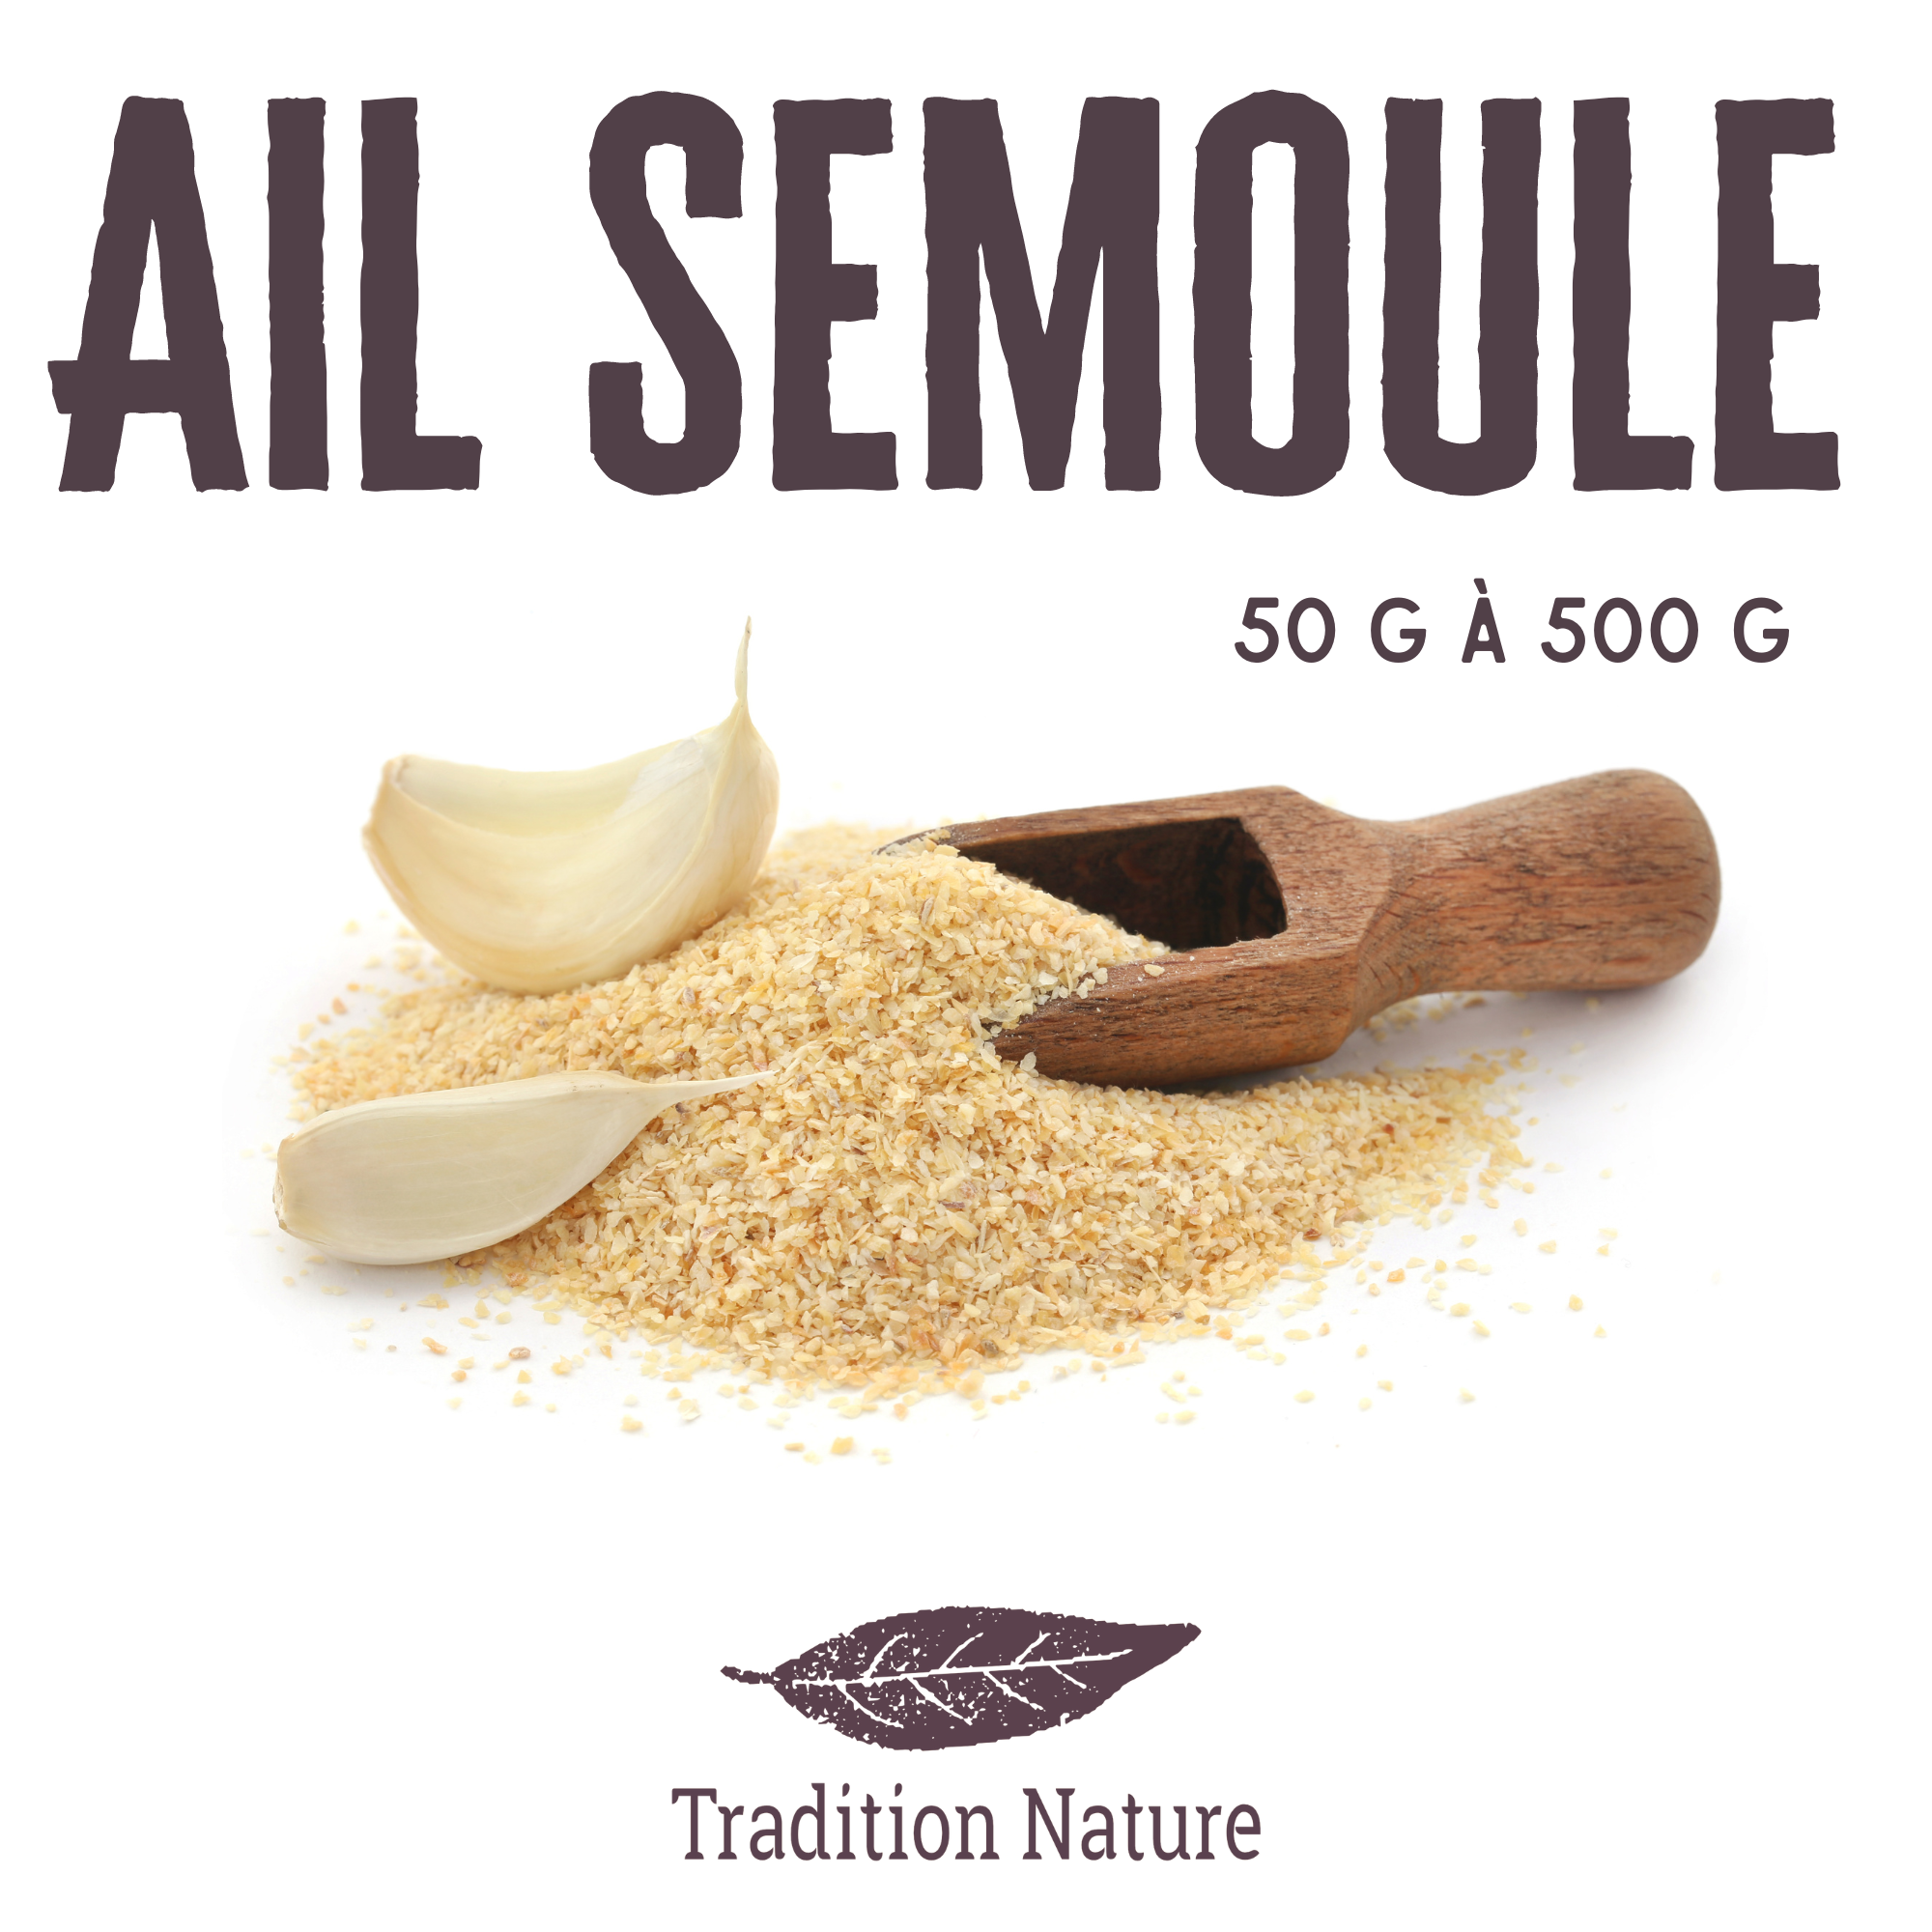 Ail semoule – Tradition Nature